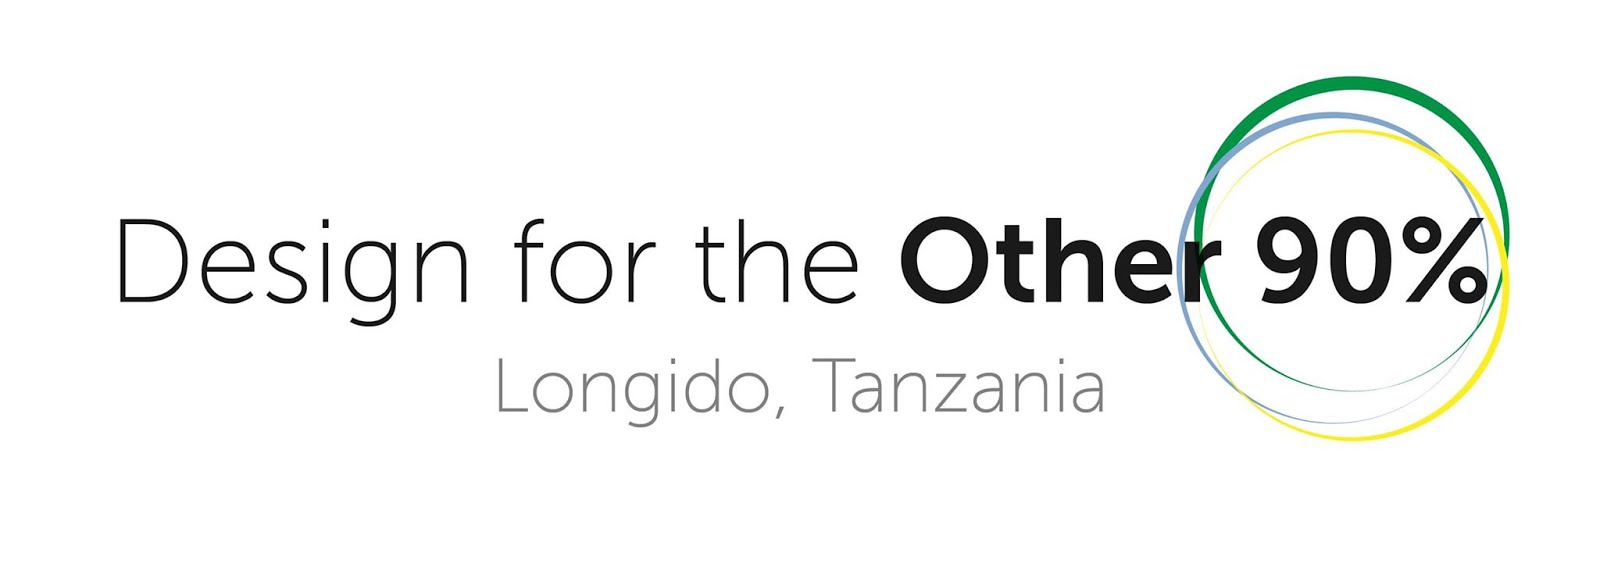 Design for the Other 90% - Tanzania